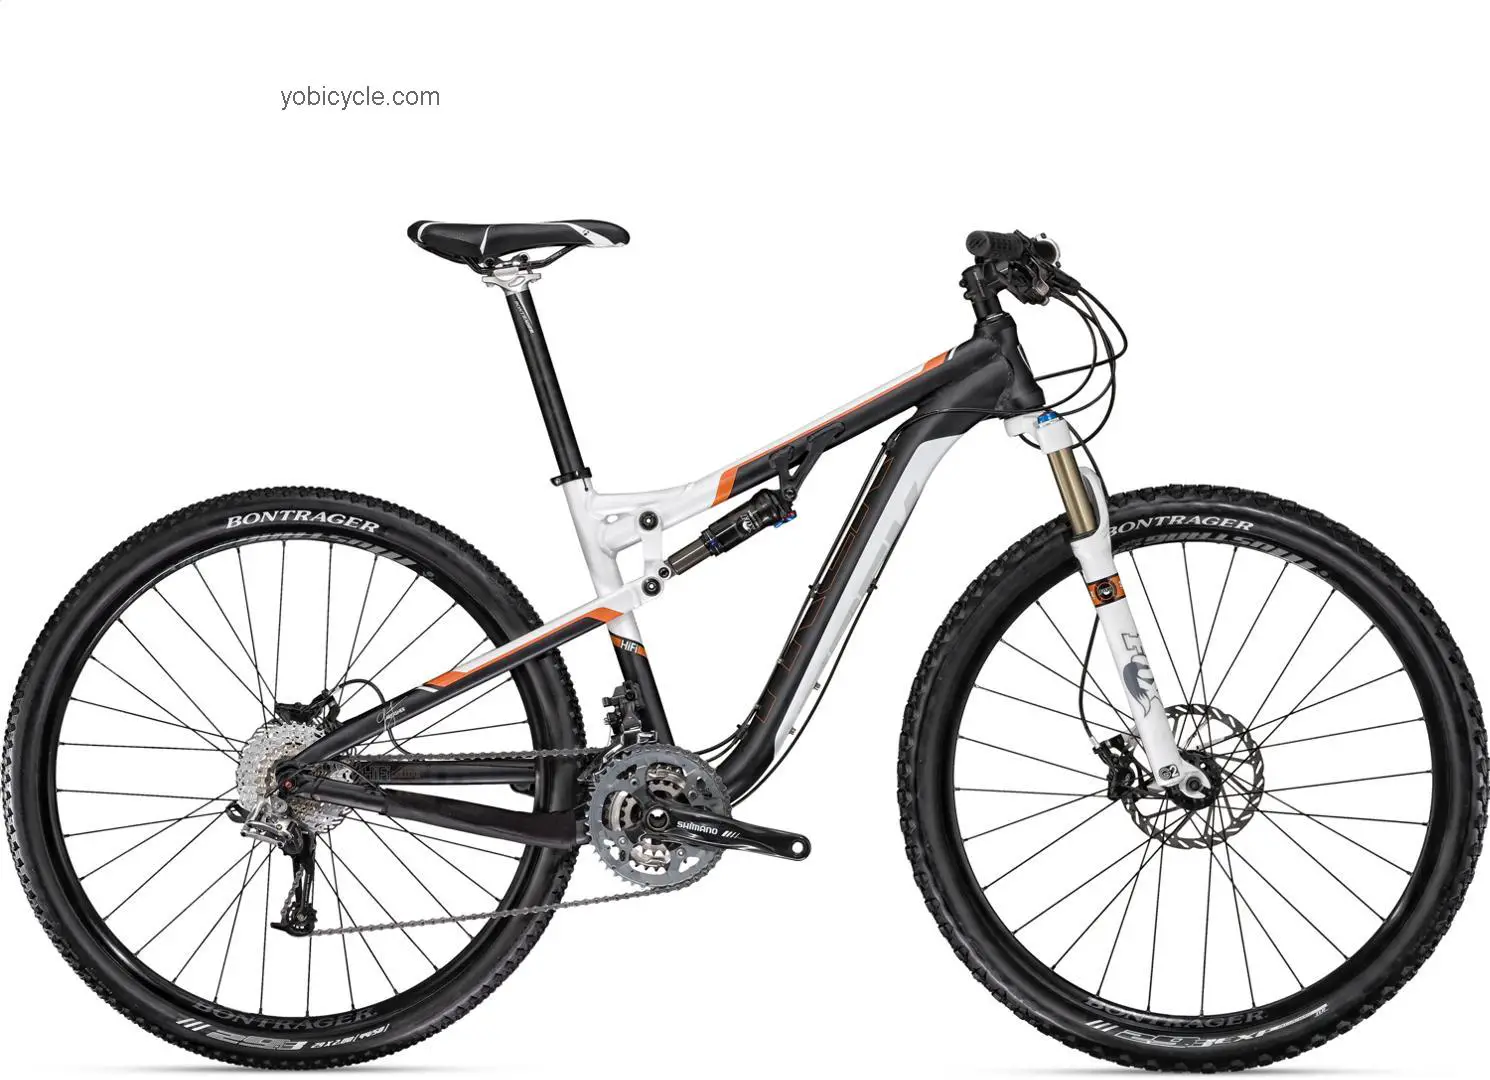 Trek Gary Fisher HiFi Deluxe 2011 comparison online with competitors